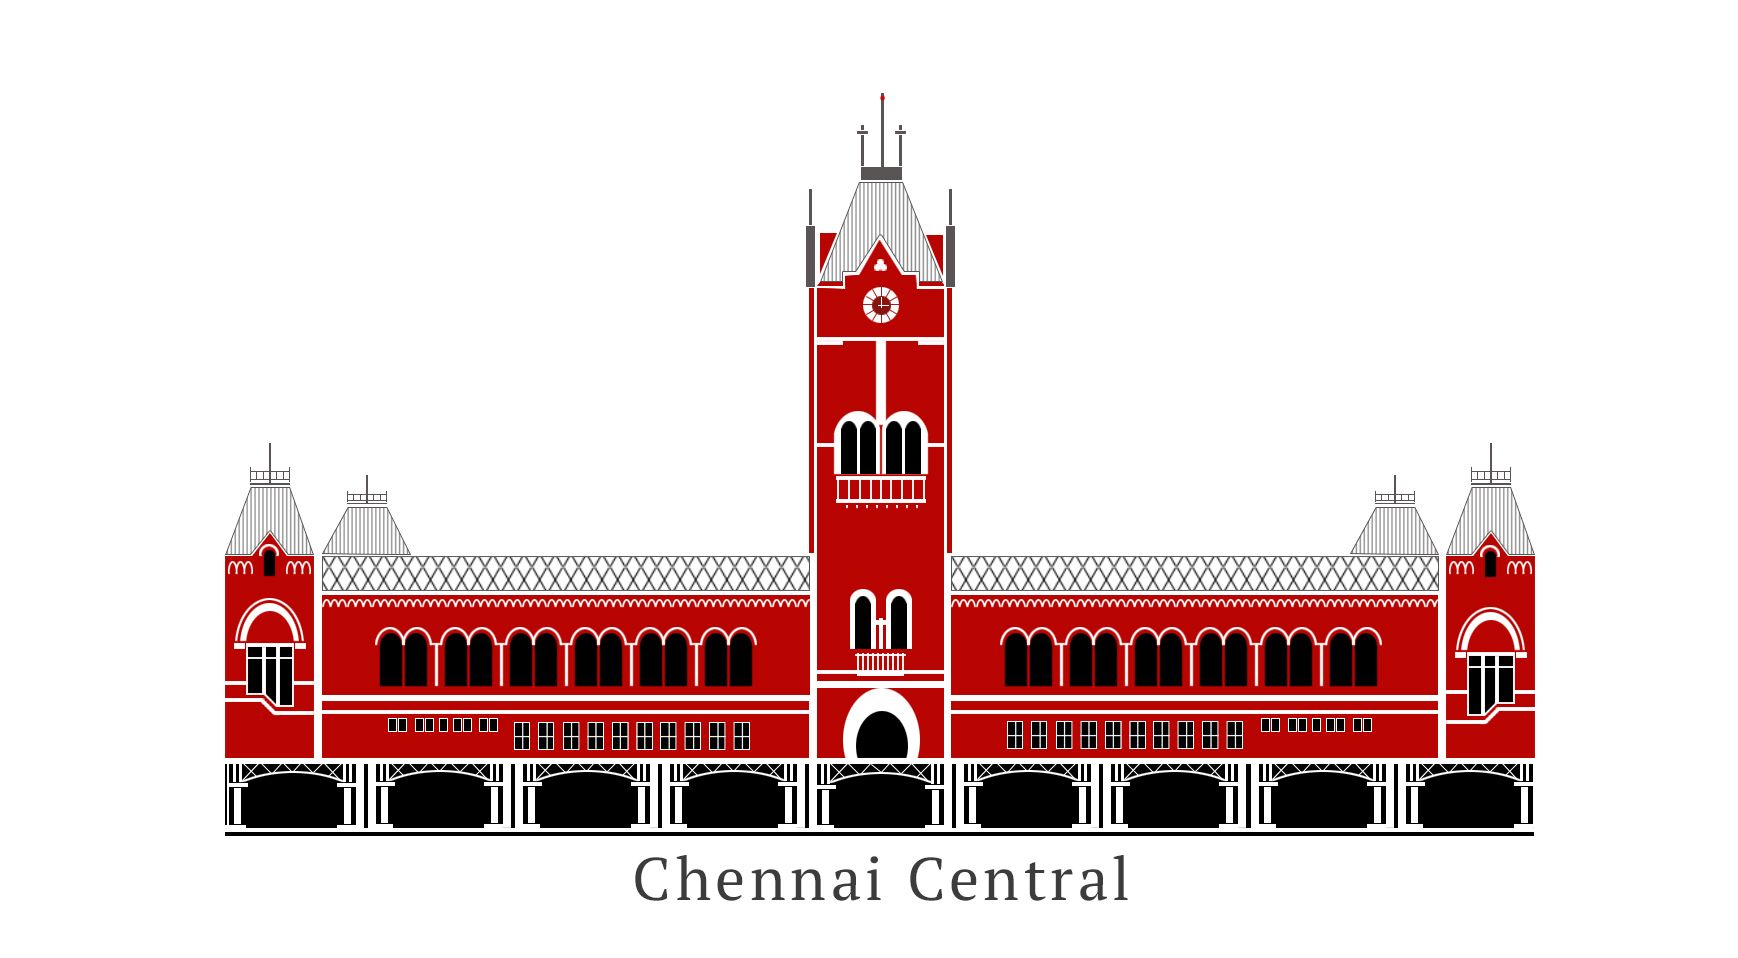 Check Out My Project: “Chennai Central” Gallery 59389425 Chennai Central. India Art, City Map Poster, City Art